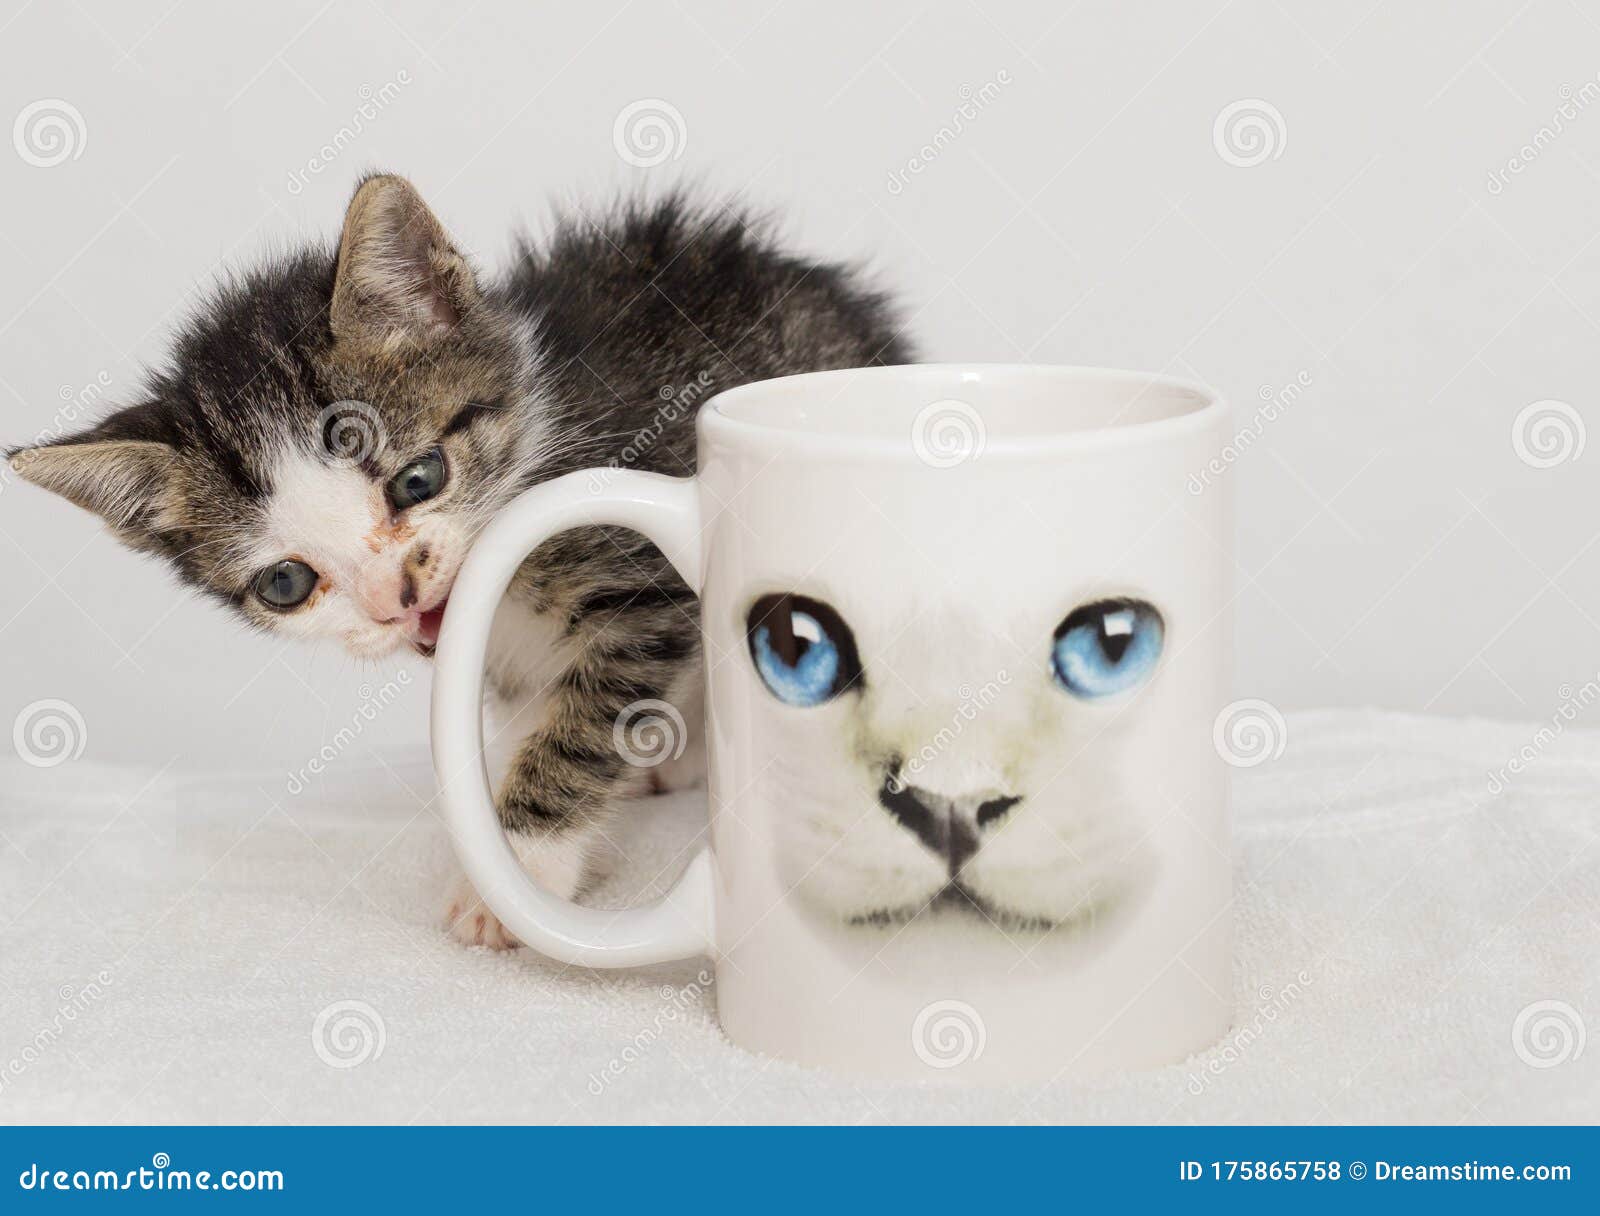 Soft Kitty, Warm Kitty, Little Ball of Fur Stock Photo - Image of ...